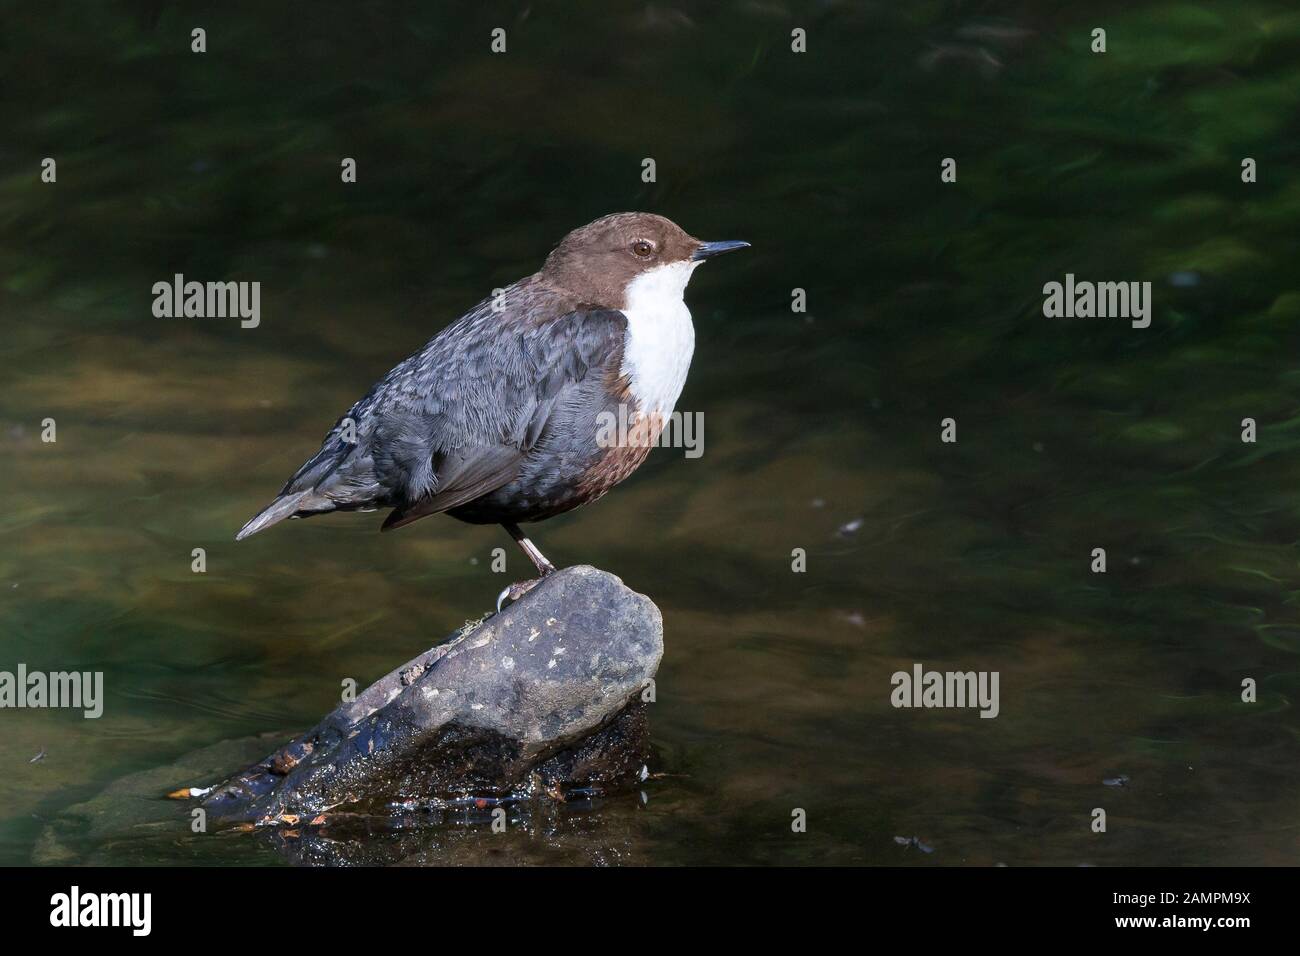 Side view close up of wild UK dipper bird (Cinclus cinclus) isolated on rock by shallow water of woodland stream, looking up in summer sun. Stock Photo